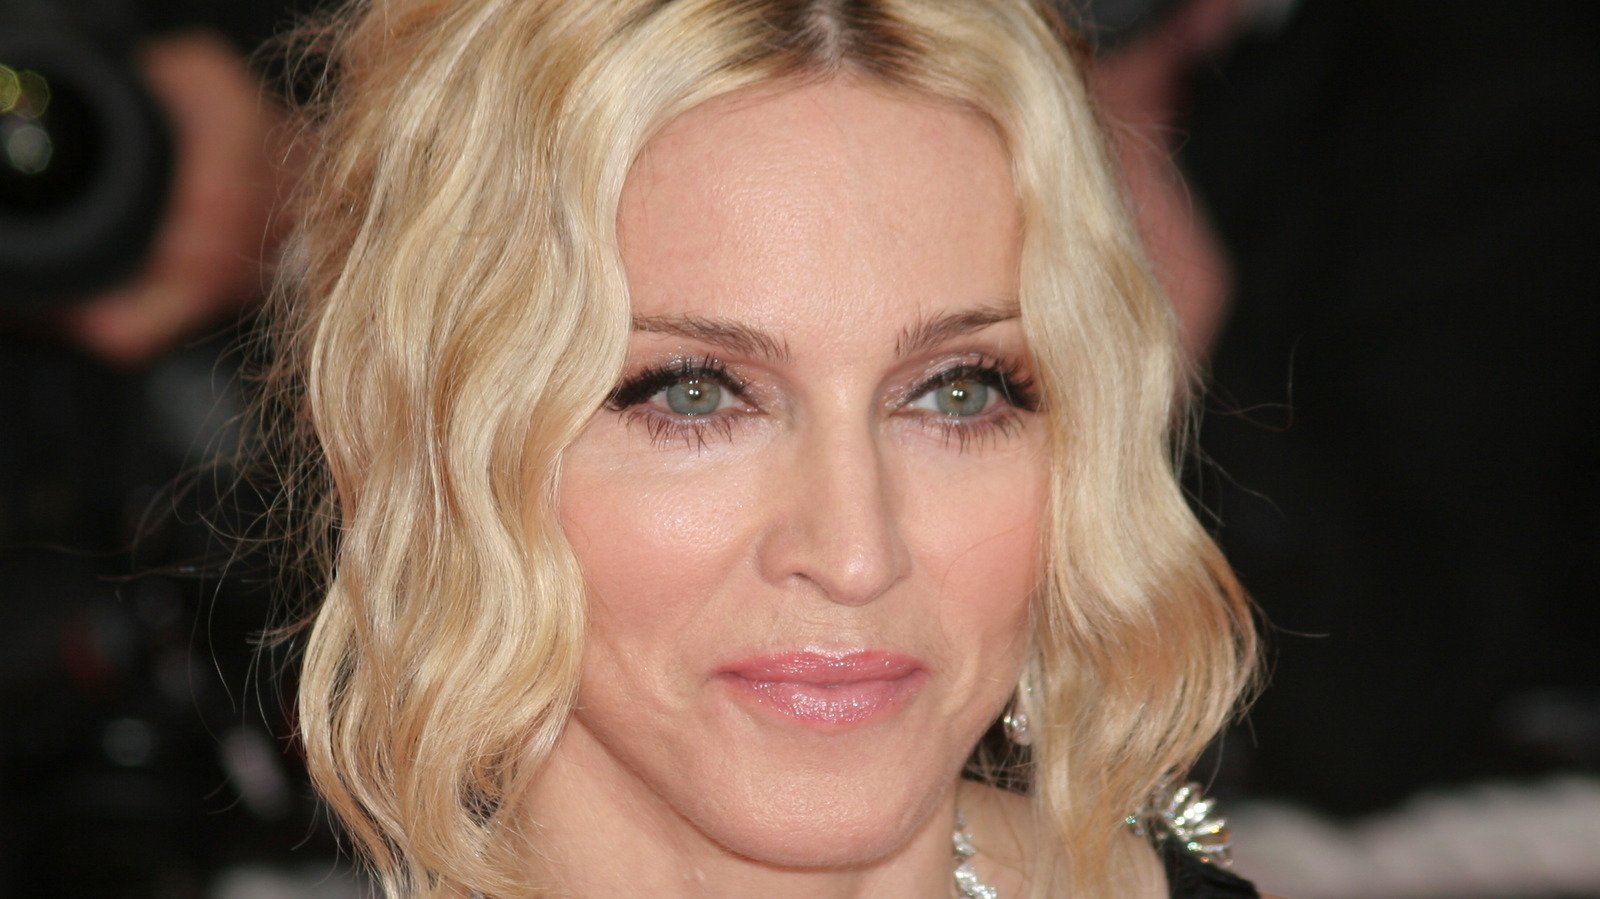 The Truth Behind Madonna's Horse Injury